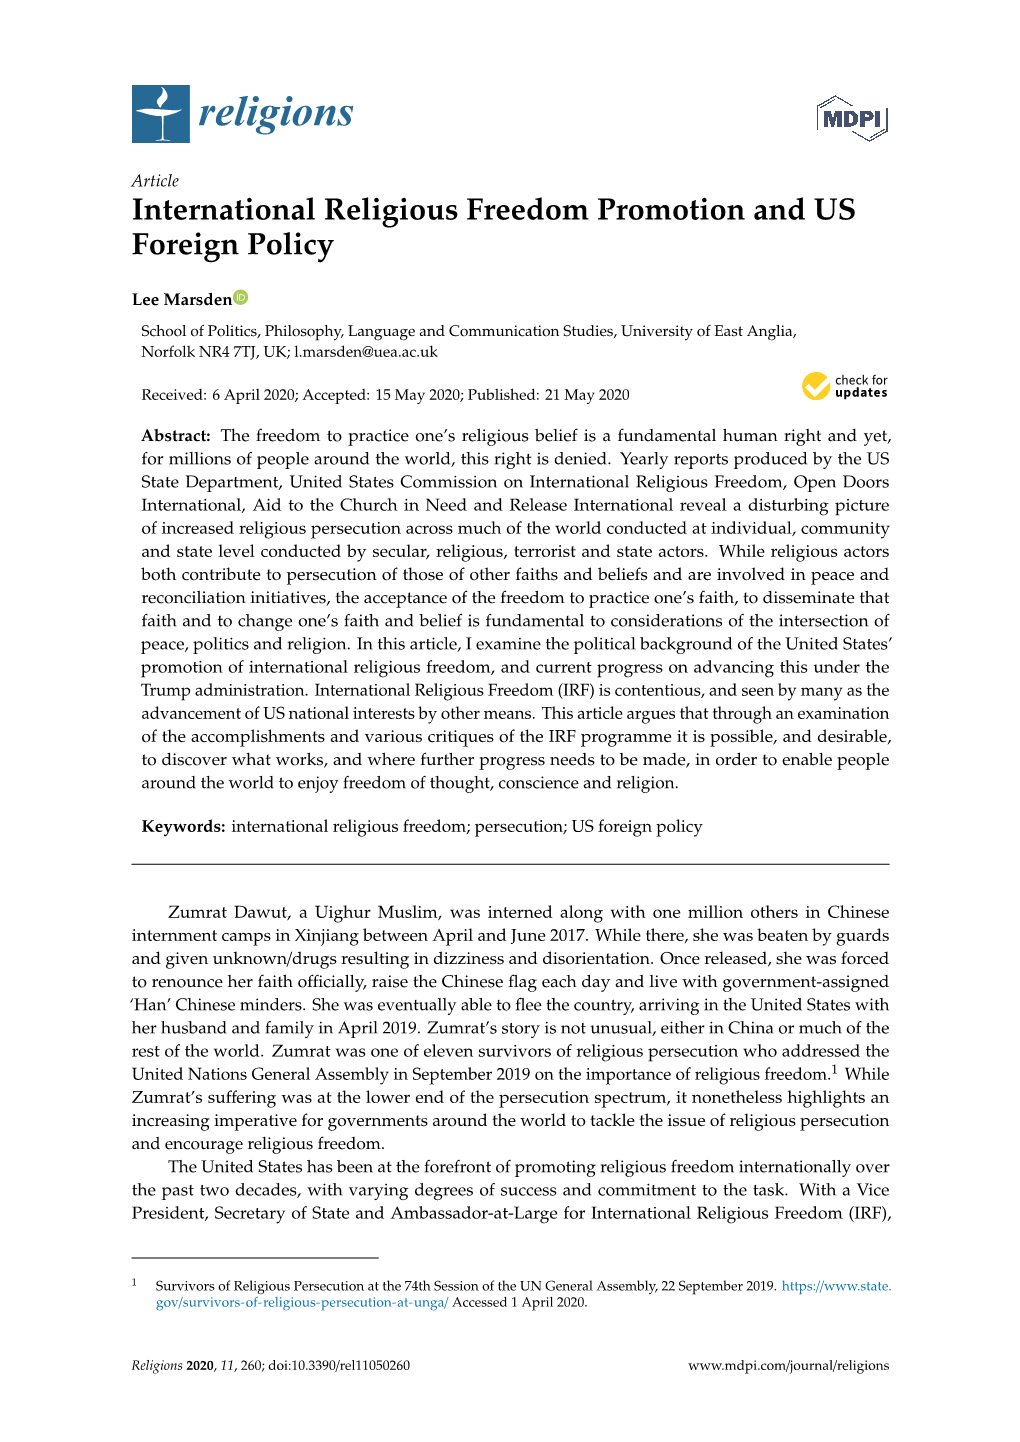 International Religious Freedom Promotion and US Foreign Policy